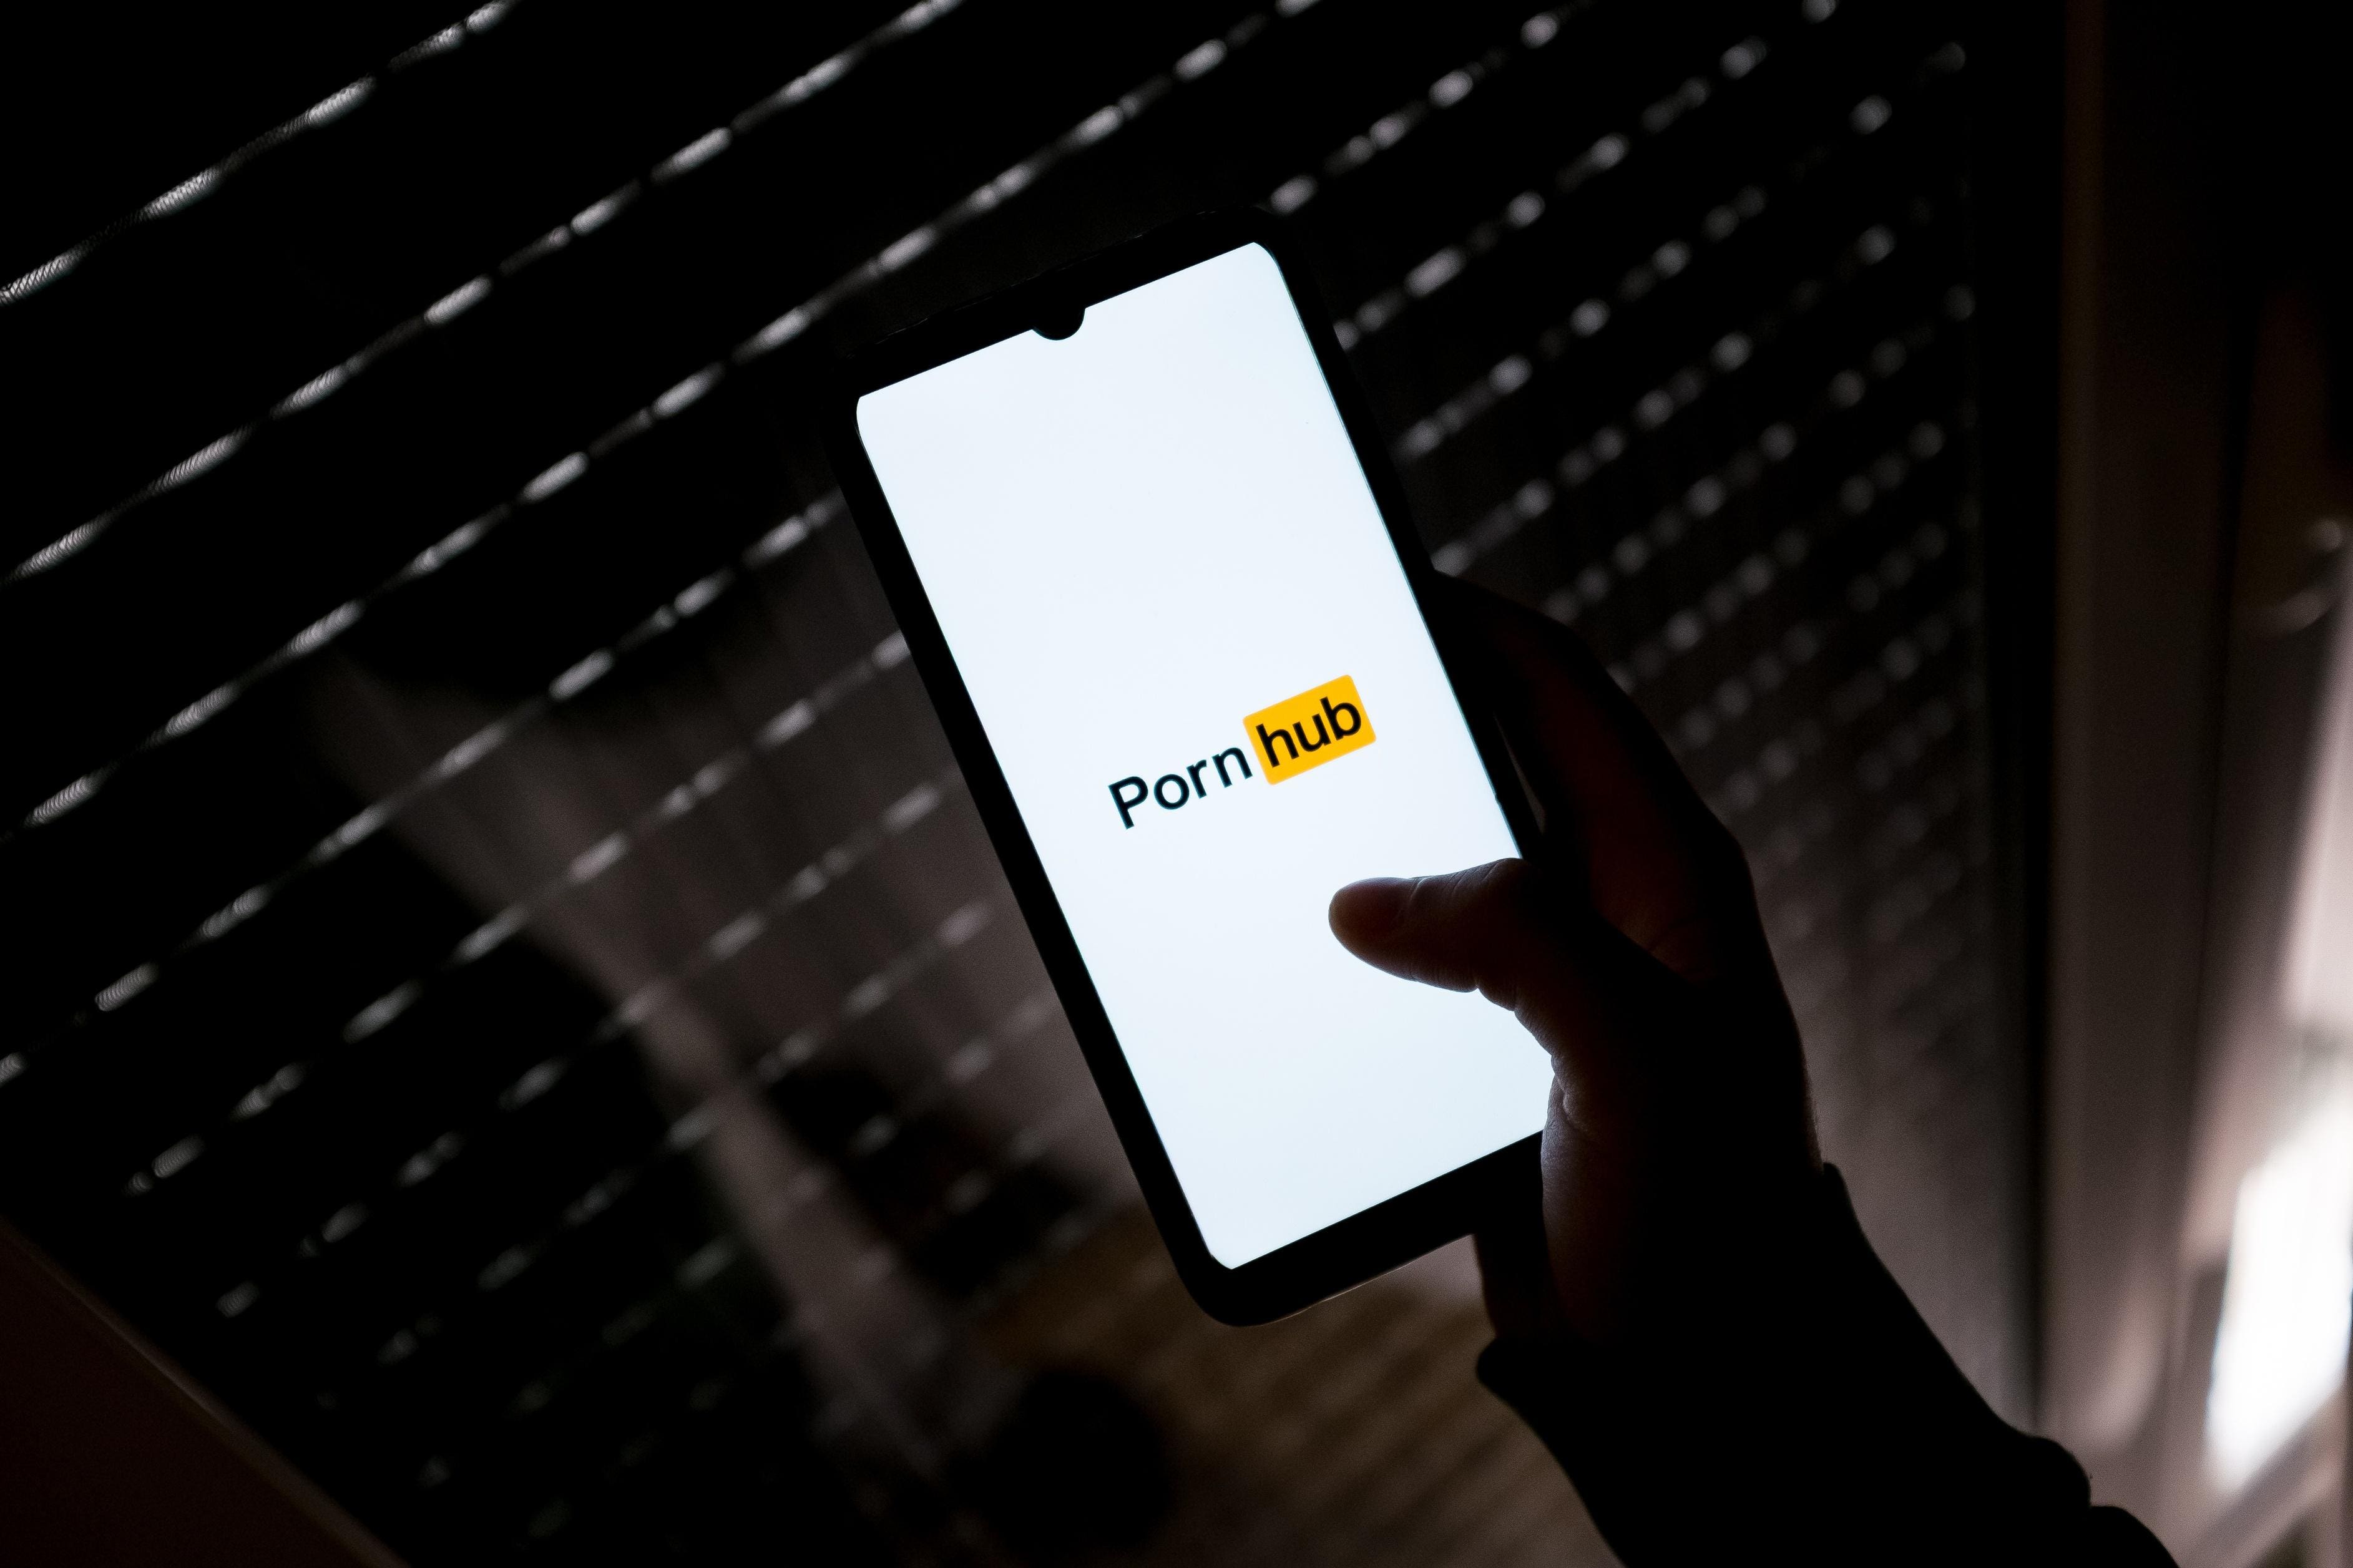 courtney wyatt recommends How To Delete My Pornhub Account